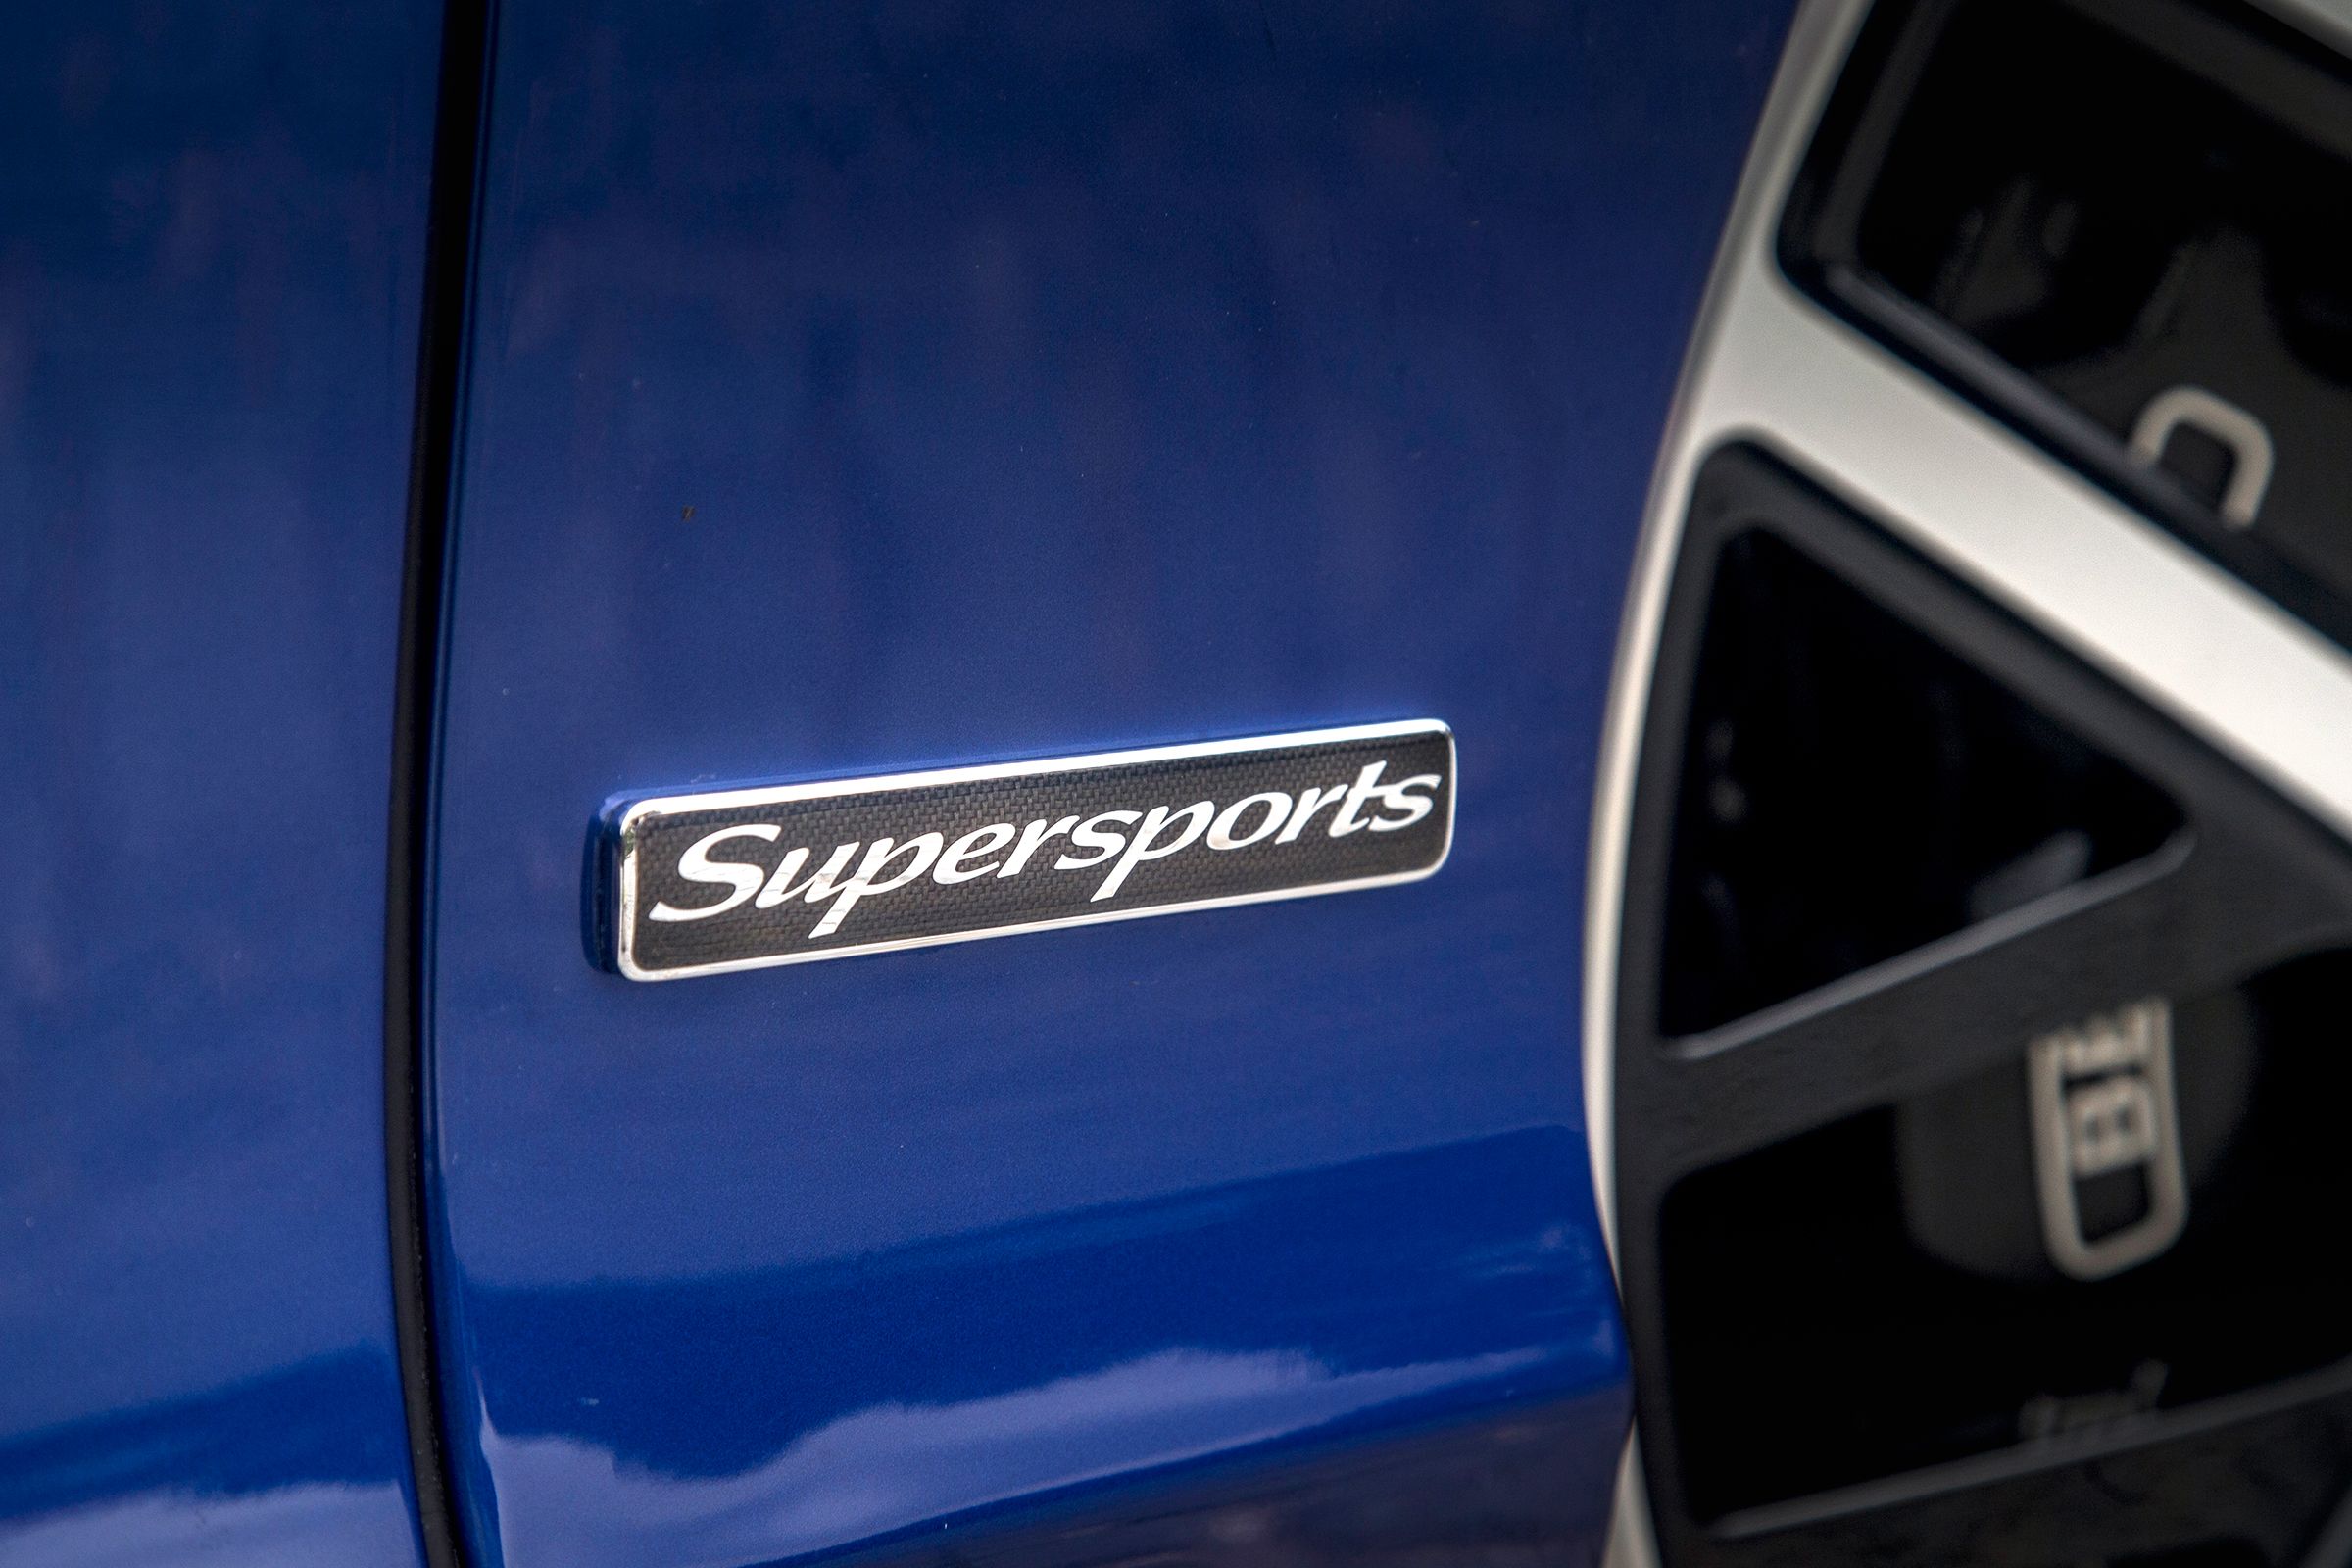 2017 Bentley Continental Supersports Blue Exterior View Side Emblem (View 16 of 31)